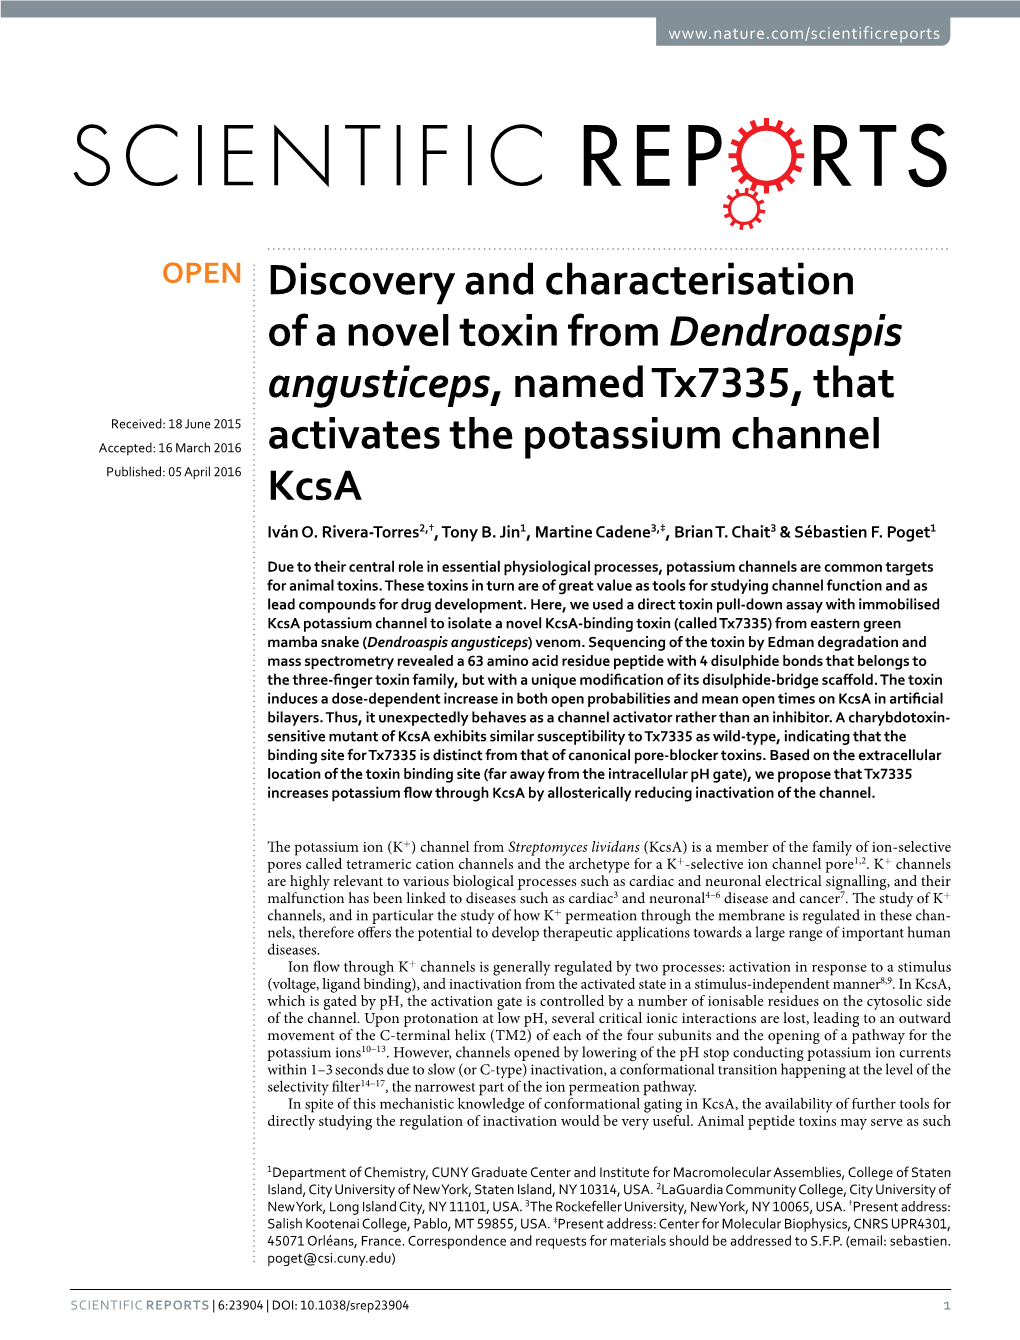 Discovery and Characterisation of a Novel Toxin from Dendroaspis